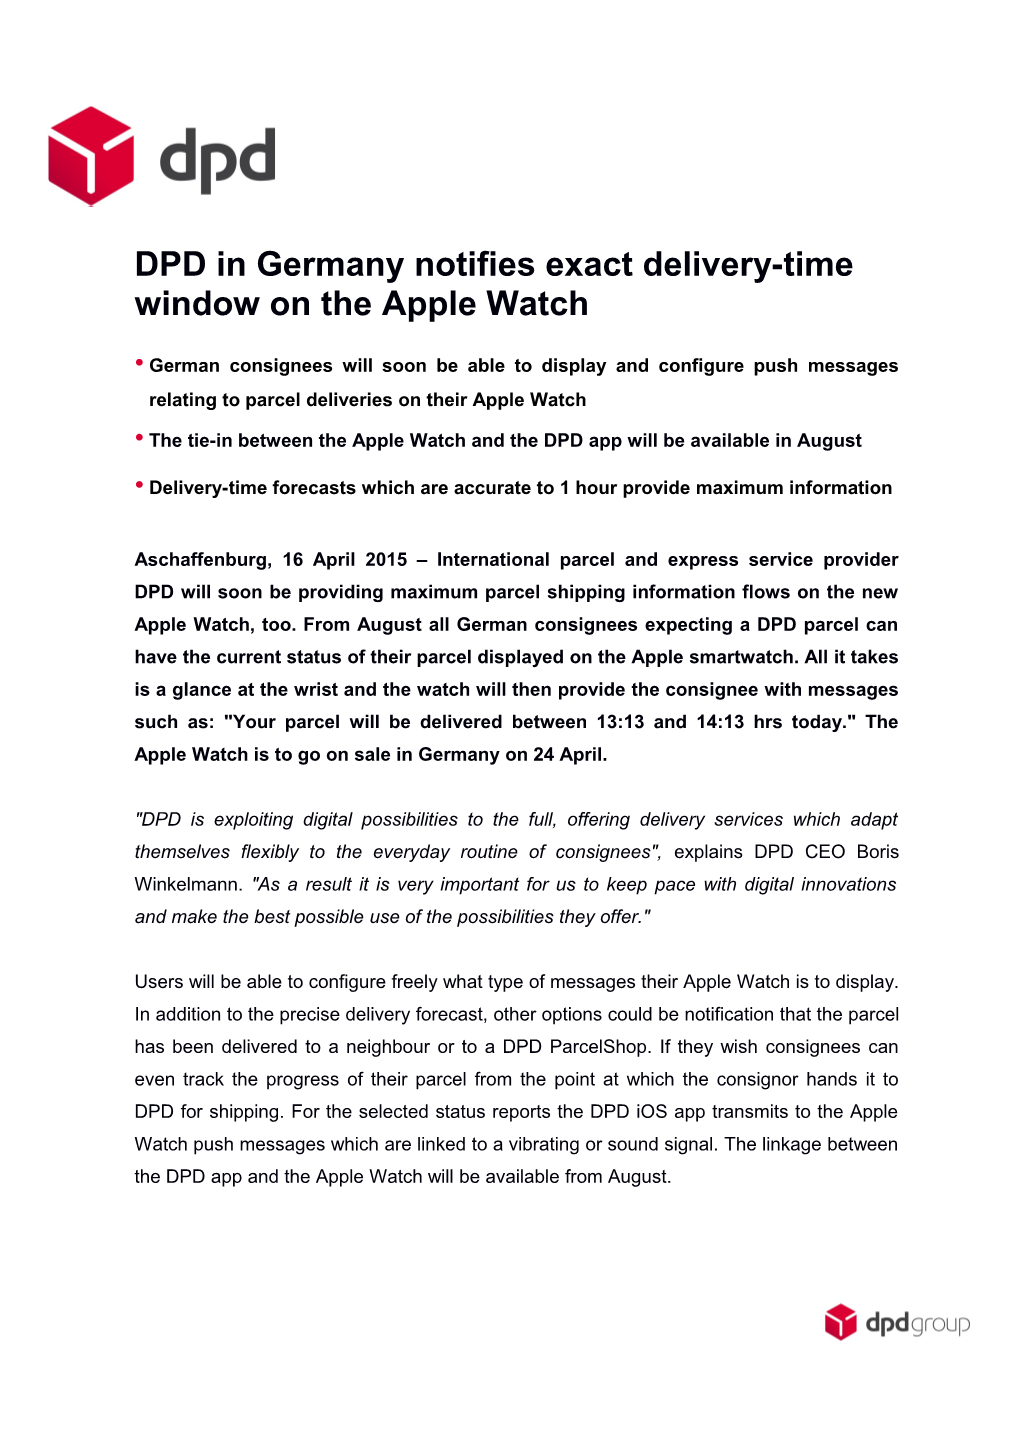 DPD in Germany Notifies Exact Delivery-Time Window on the Apple Watch